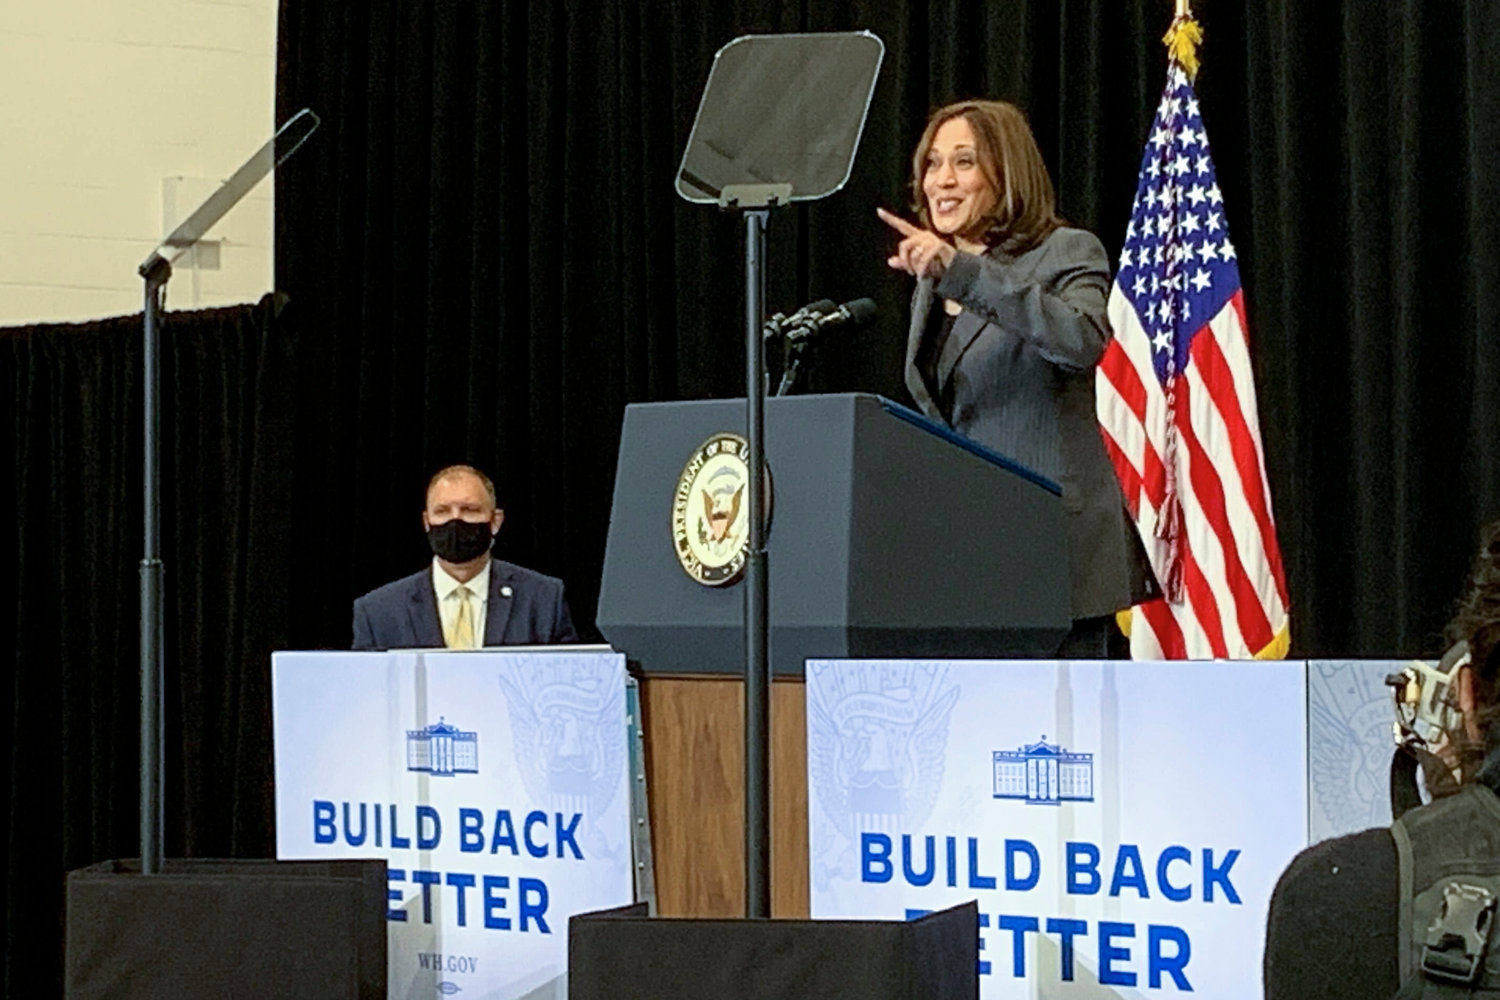 Vice President Kamala Harris refuses to give up on the Biden administration’s Build Back Better infrastructure plan, visiting the Northeast Bronx YMCA in Edenwald last week in the heart of The Squad territory. Yet Squad congress members Jamaal Bowman and Alexandria Ocasio-Cortez say they back the bill package — and blame U.S. Sens. Joe Manchin III and Kyrsten Sinema for any threats jeopardizing it.